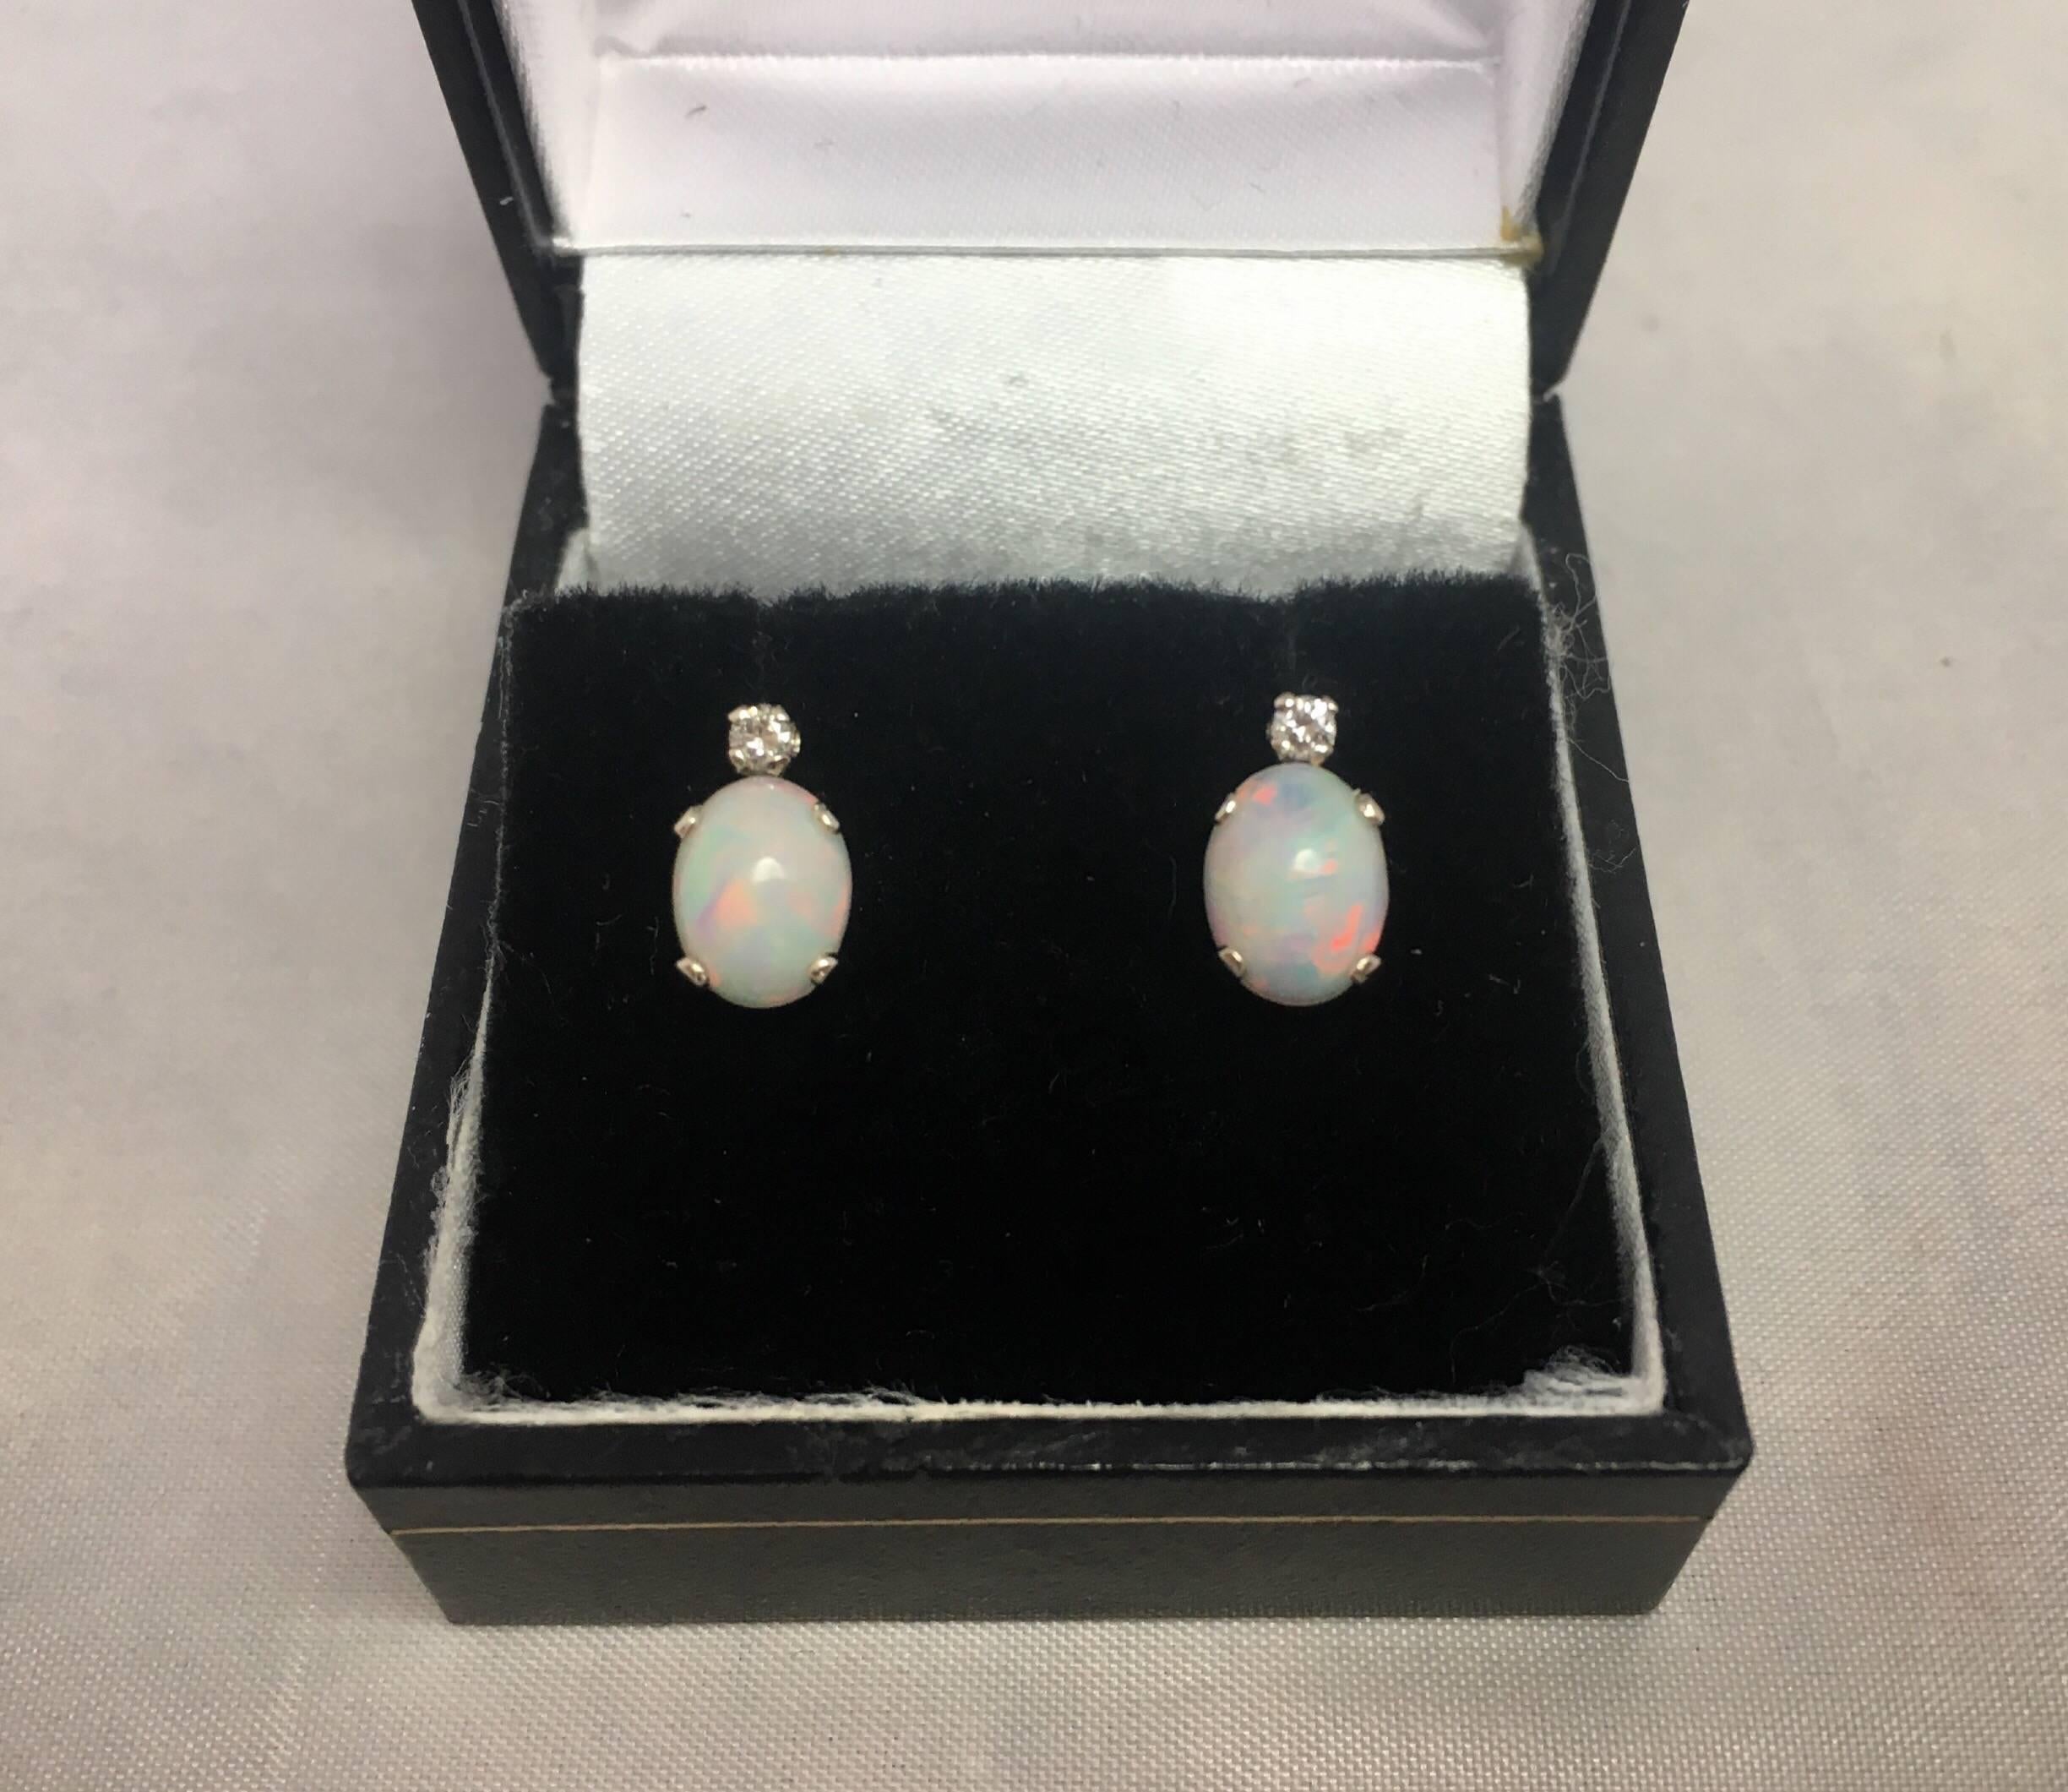 Fine natural white opal pendant and earring set with diamond accents.

The pendant is set with a 1.46 carat white opal that measures 9x7mm with a diamond accent.
The earrings are set with two 0.70 carat (1.40tcw) white opals measuring 7x5mm with